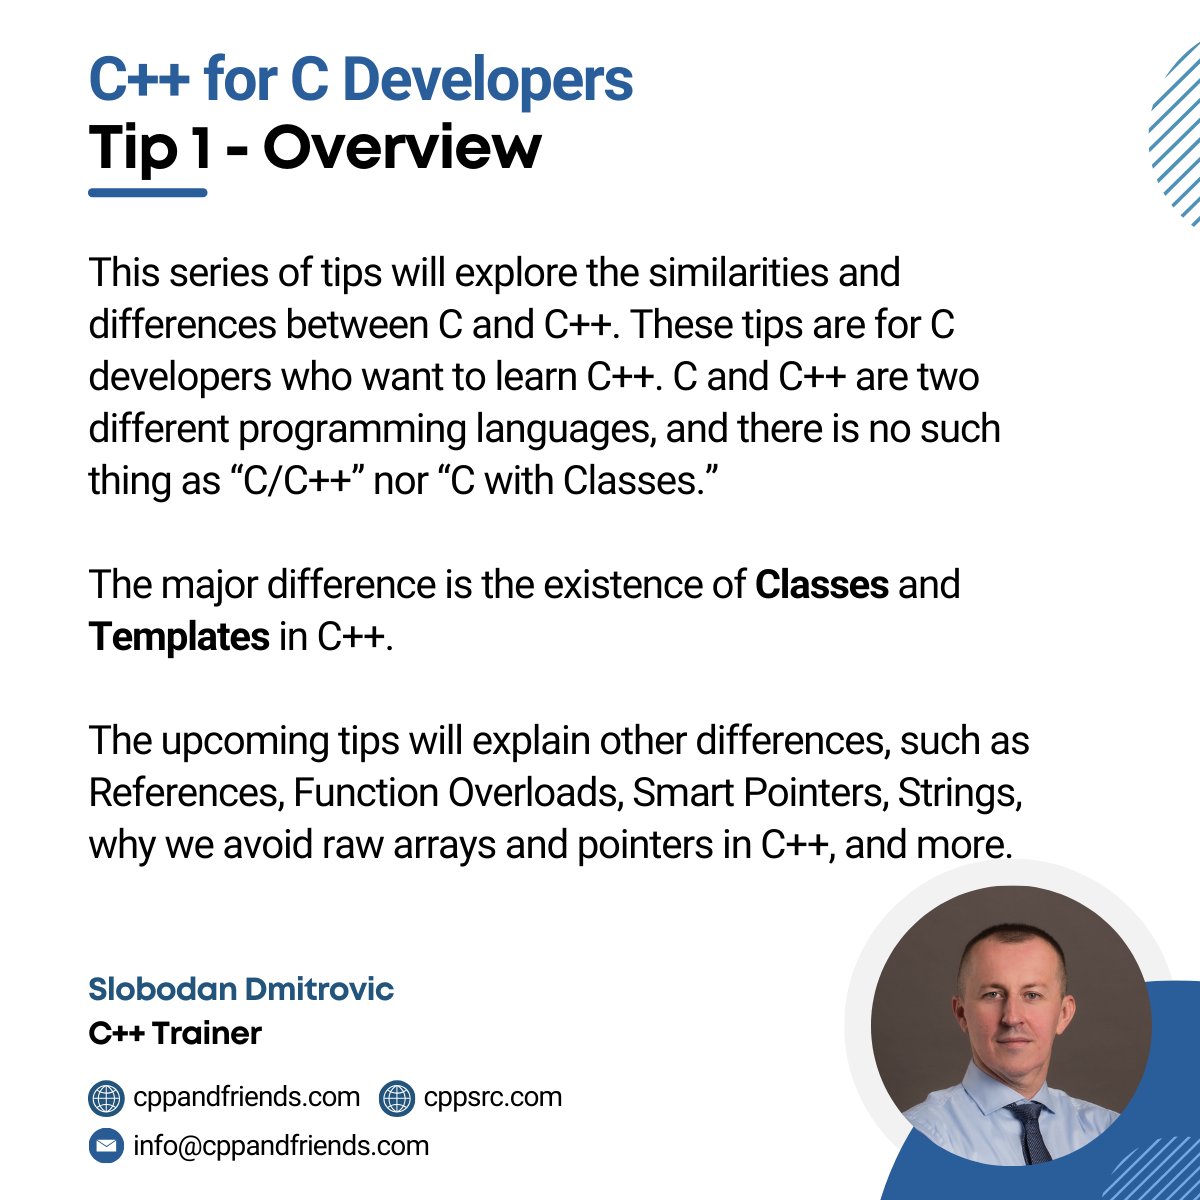 C and C++ are two different programming languages, and there is no such thing as “C/C++” nor “C with Classes.” C is a procedural language, whereas C++ is an object-oriented language.
The major difference is the existence of Classes and Templates in C++.
#cplusplus
#cprogramming